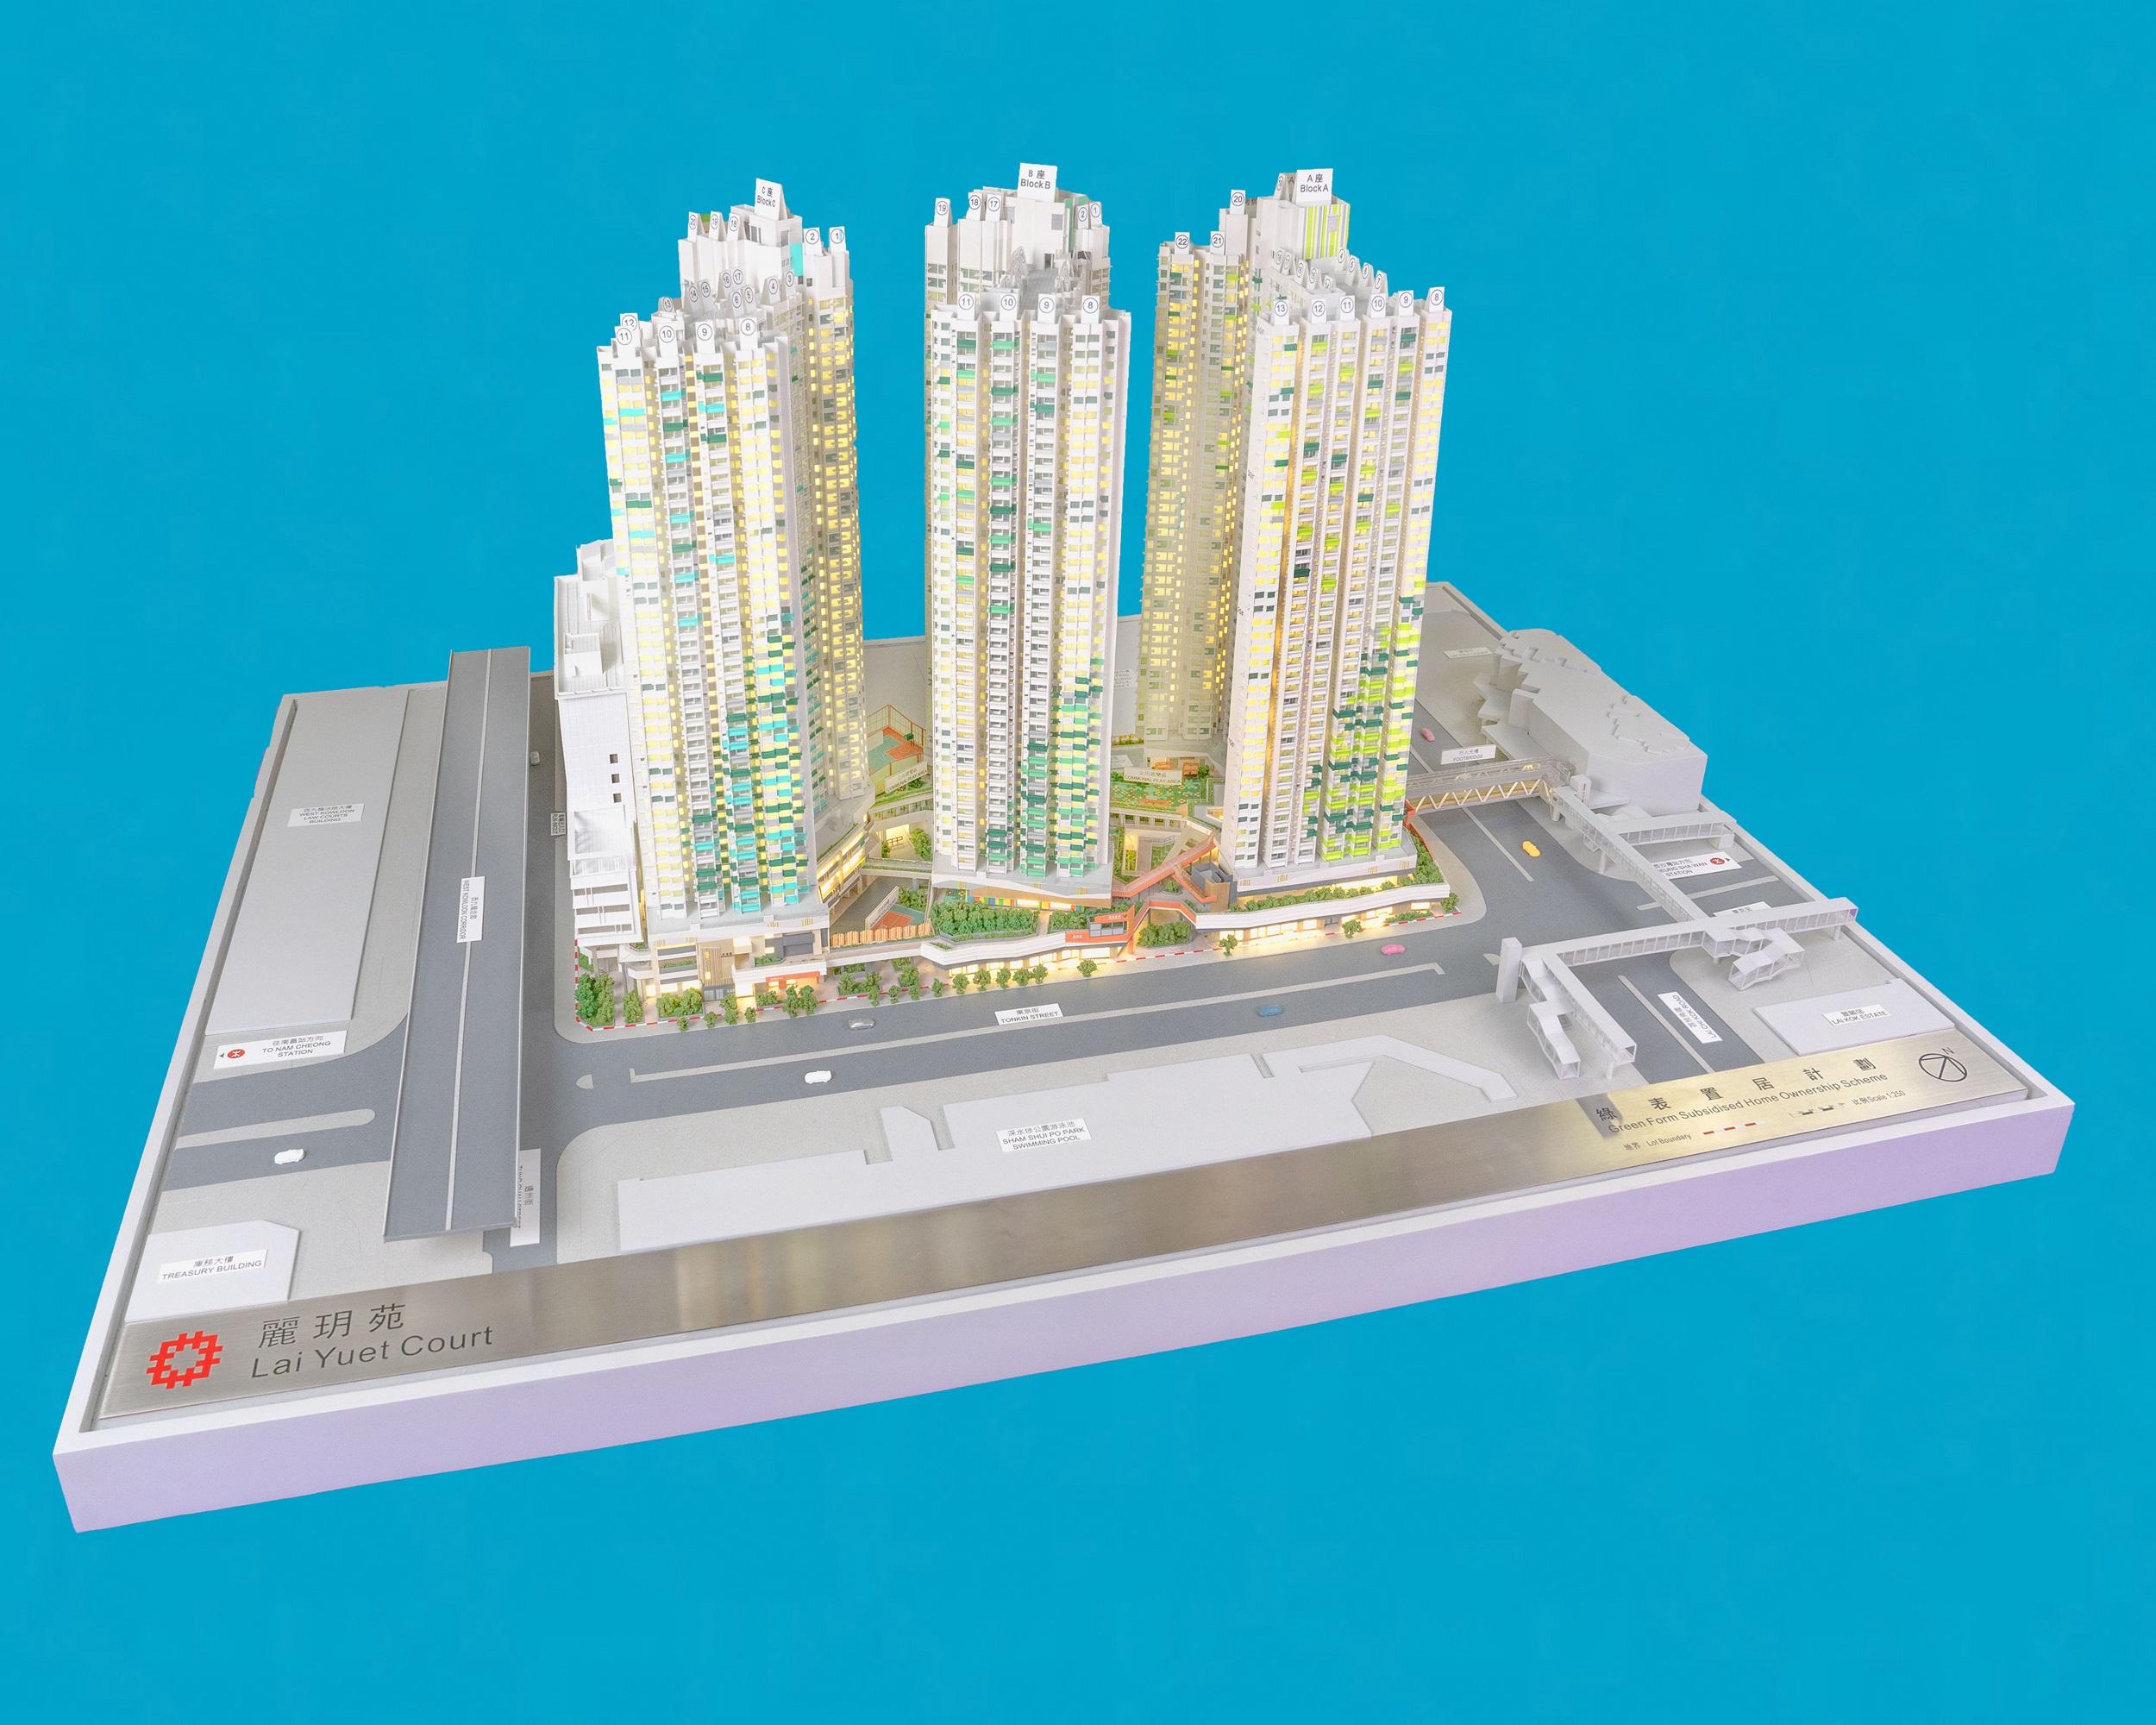 Application for Sale of Green Form Subsidised Home Ownership Scheme Flats 2023 will start on March 28. Photo shows a model of Lai Yuet Court, a new development under the scheme.